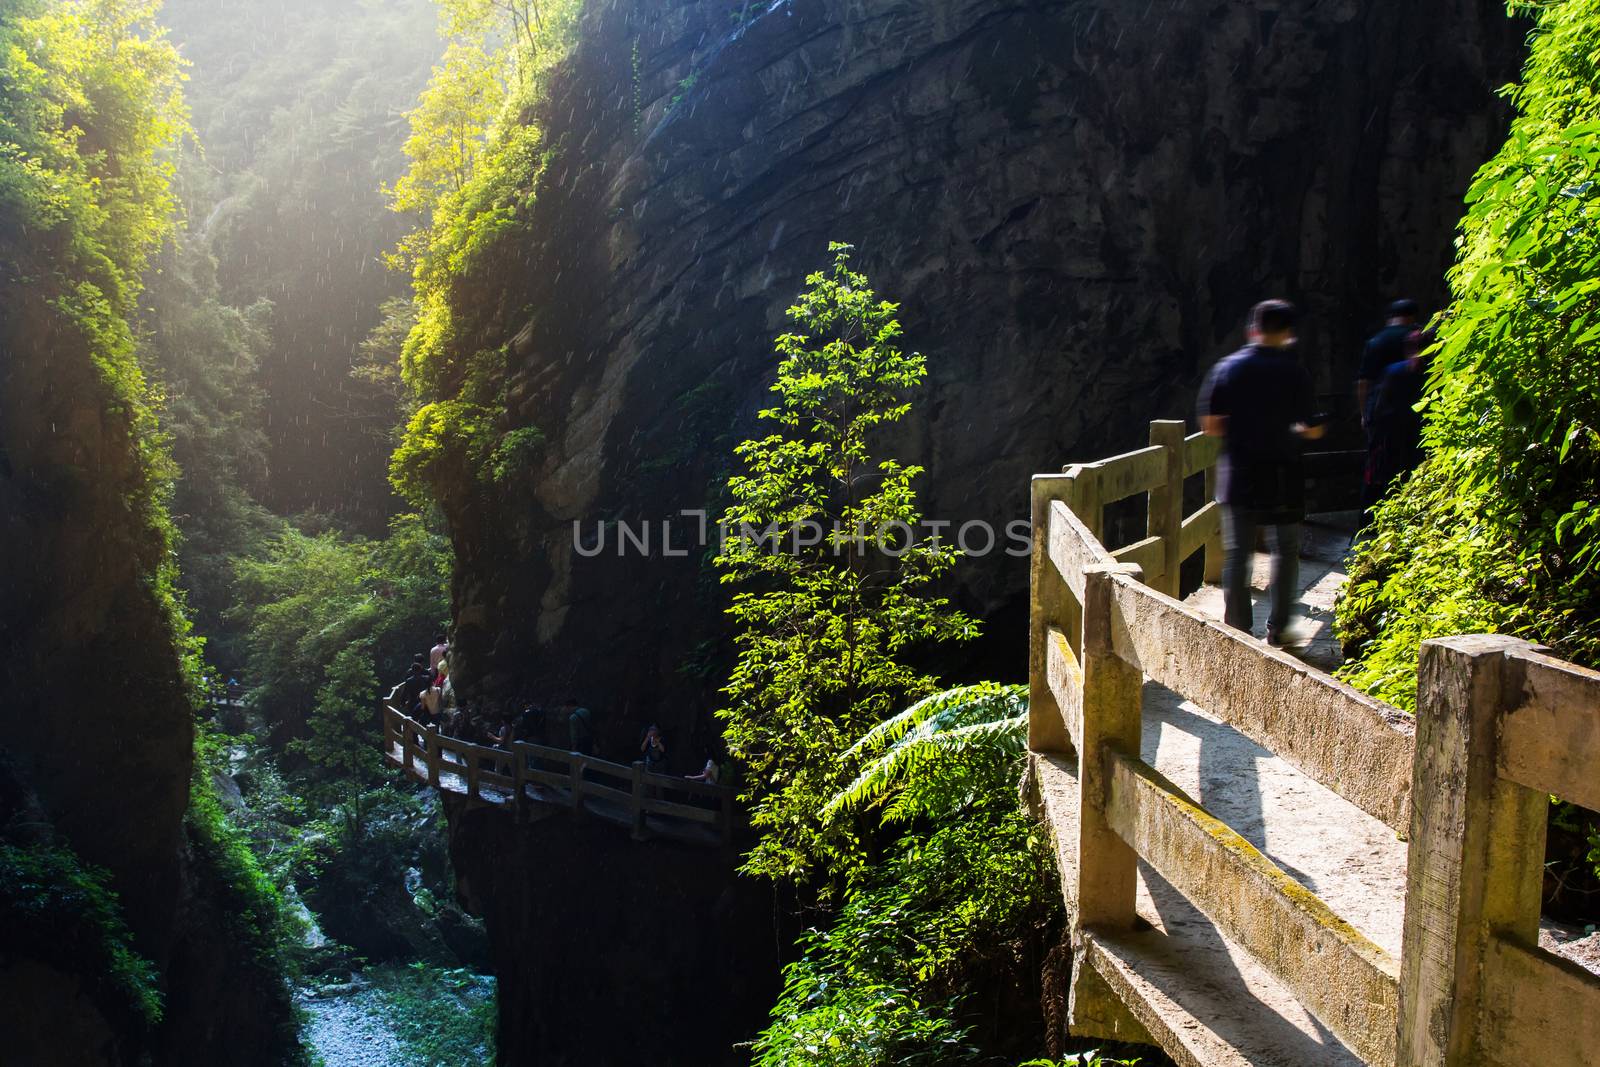 Longshuixia Fissure Gorge is natural place in Wulong county, southwest of China Chongqing city.